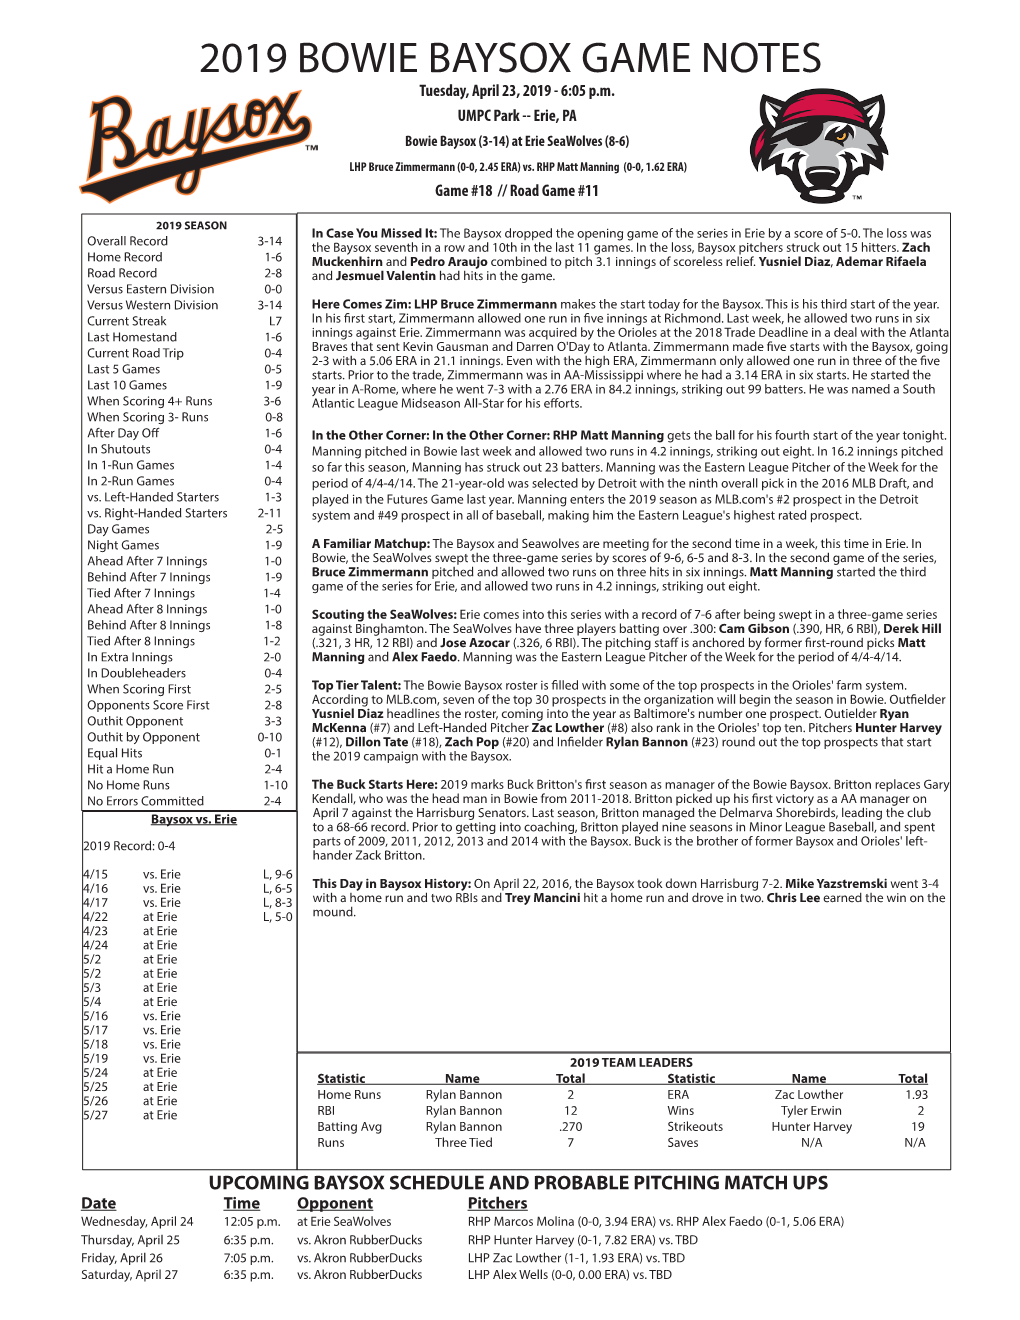 2019 BOWIE BAYSOX GAME NOTES Tuesday, April 23, 2019 - 6:05 P.M